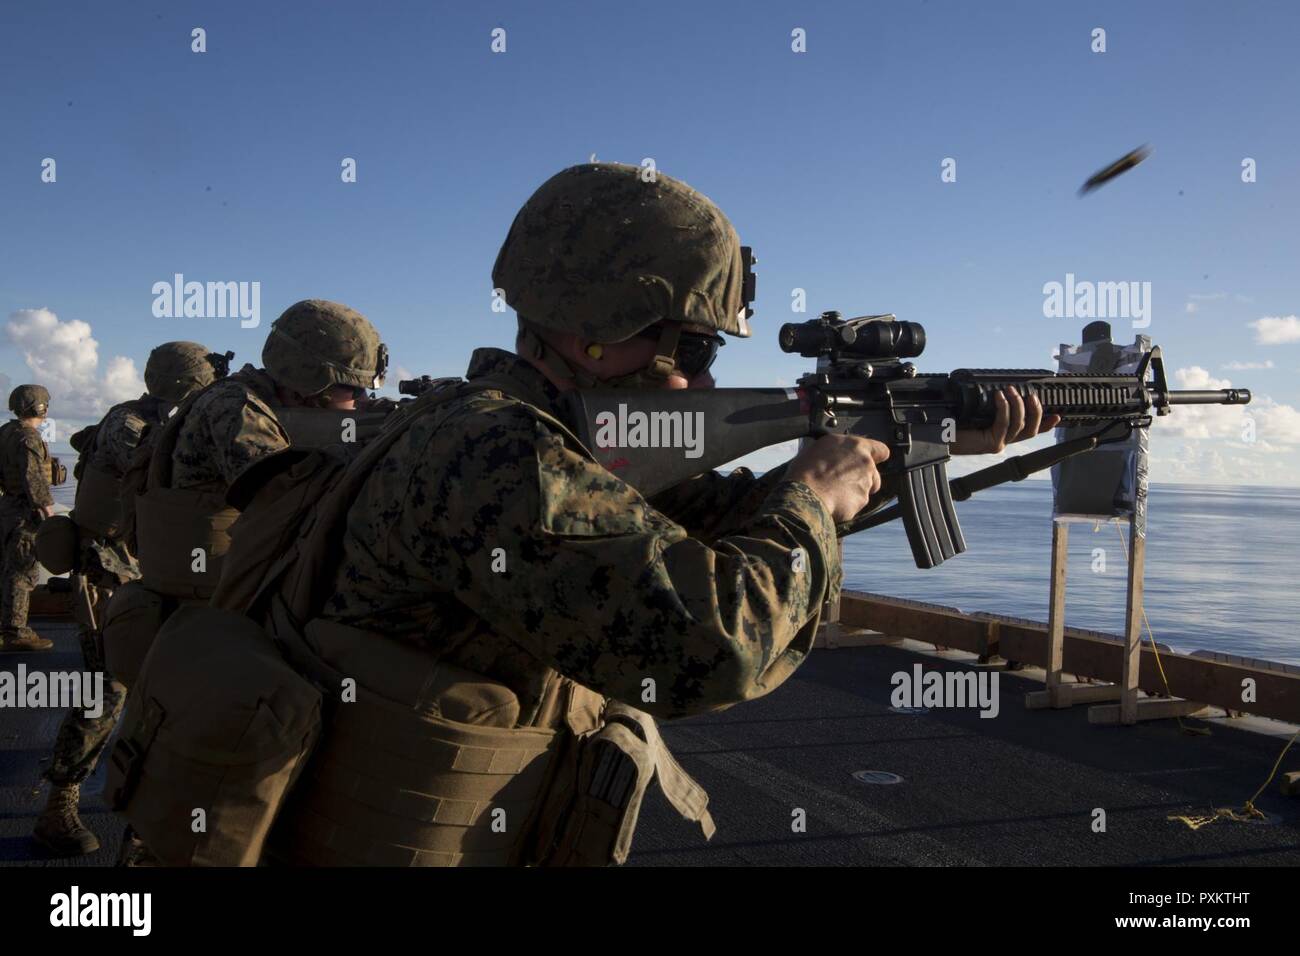 Lance Cpl. Evan Talbott, a military policeman with Combat Logistics Battalion 31, fires an M16A4 service rifle during marksmanship training aboard the USS Bonhomme Richard (LHD 6), June 15, 2017. CLB-31 is permanently assigned to the 31st MEU and provides support for all elements of the MEU. The 31st MEU partners with the Navy’s Amphibious Squadron 11 to form the amphibious component of the Bonhomme Richard Expeditionary Strike Group. The 31st MEU and PHIBRON 11 combine to provide a cohesive blue-green team capable of accomplishing a variety of missions across the Indo-Asia-Pacific region. Stock Photo